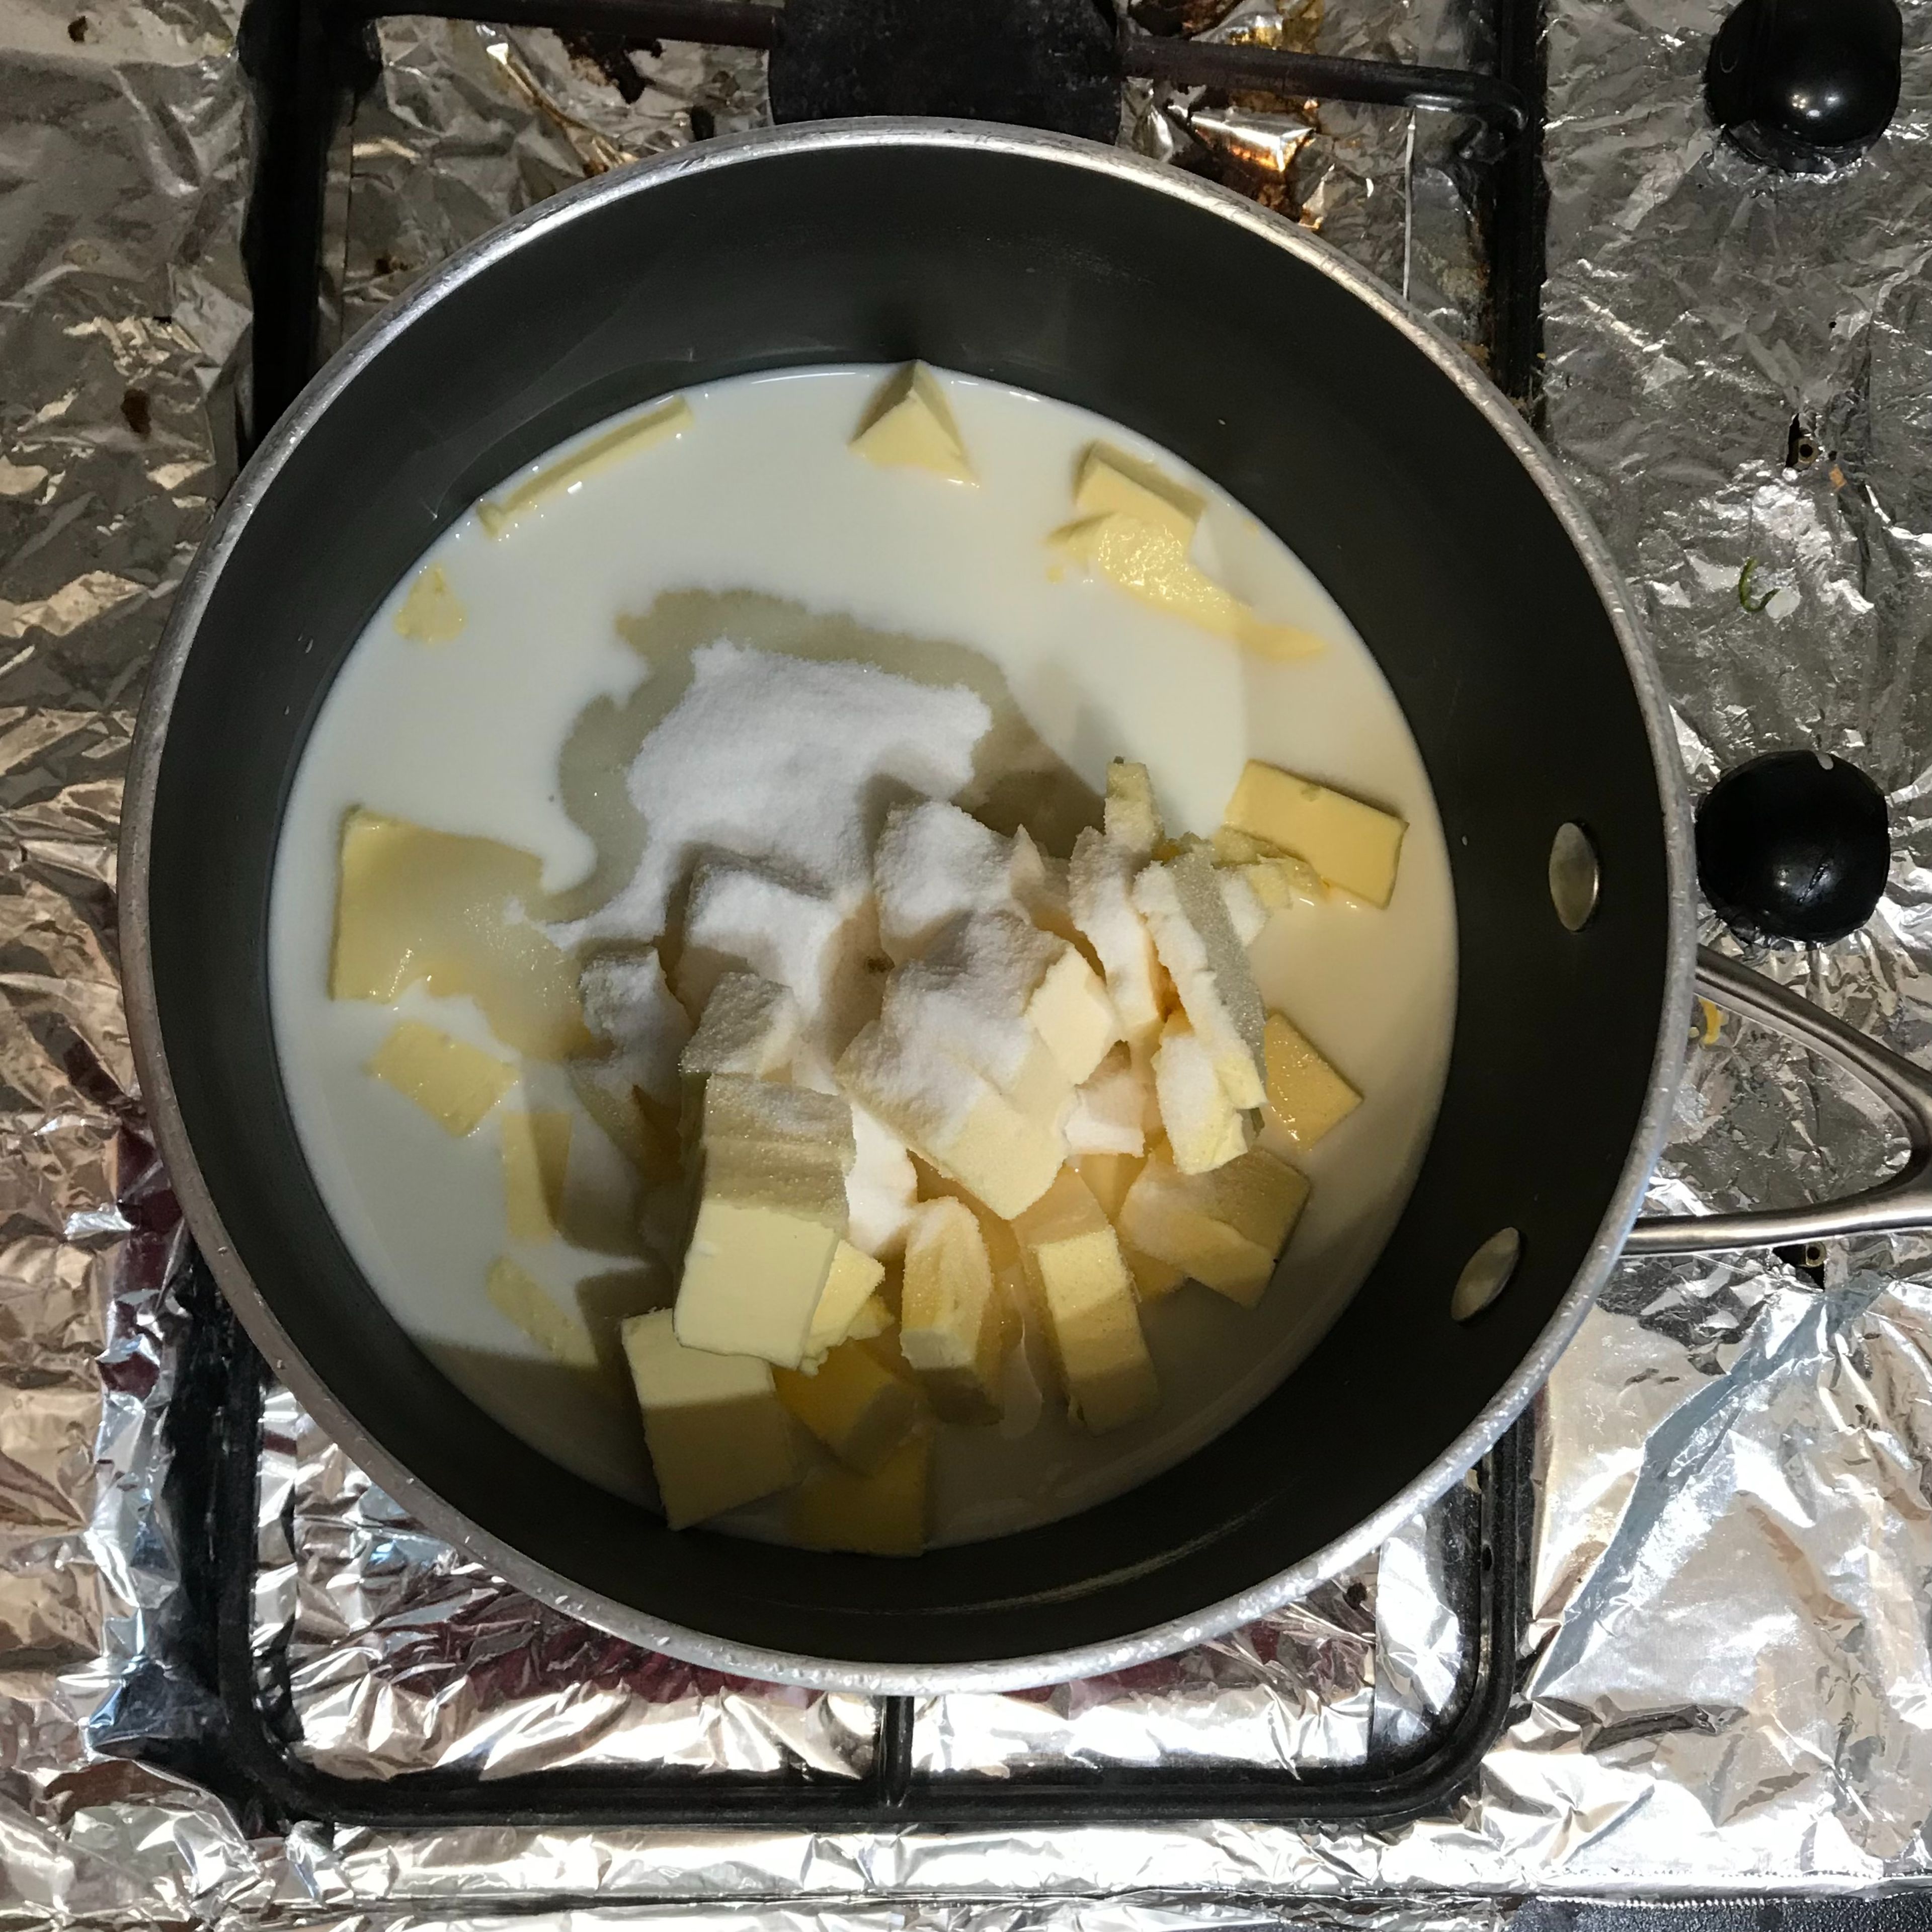 Combine white chocolate, butter, sugar and milk in a large saucepan; stir over low heat for 5 minutes or until smooth. Pour mixture into a large bowl; cool for 15 minutes.